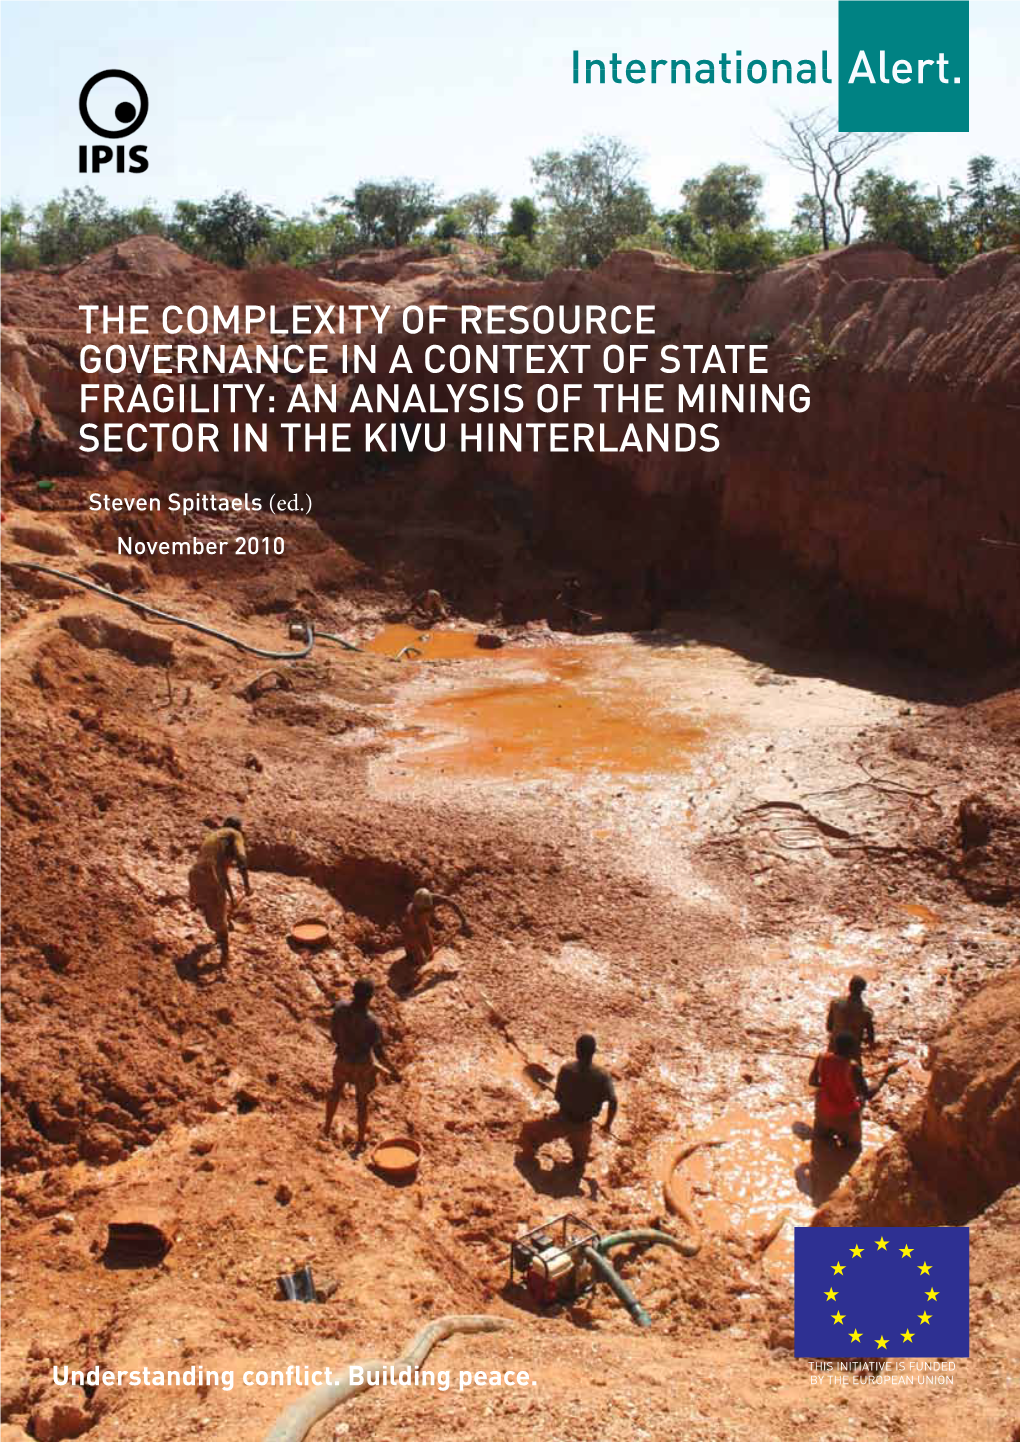 An Analysis of the Mining Sector in the Kivu Hinterlands